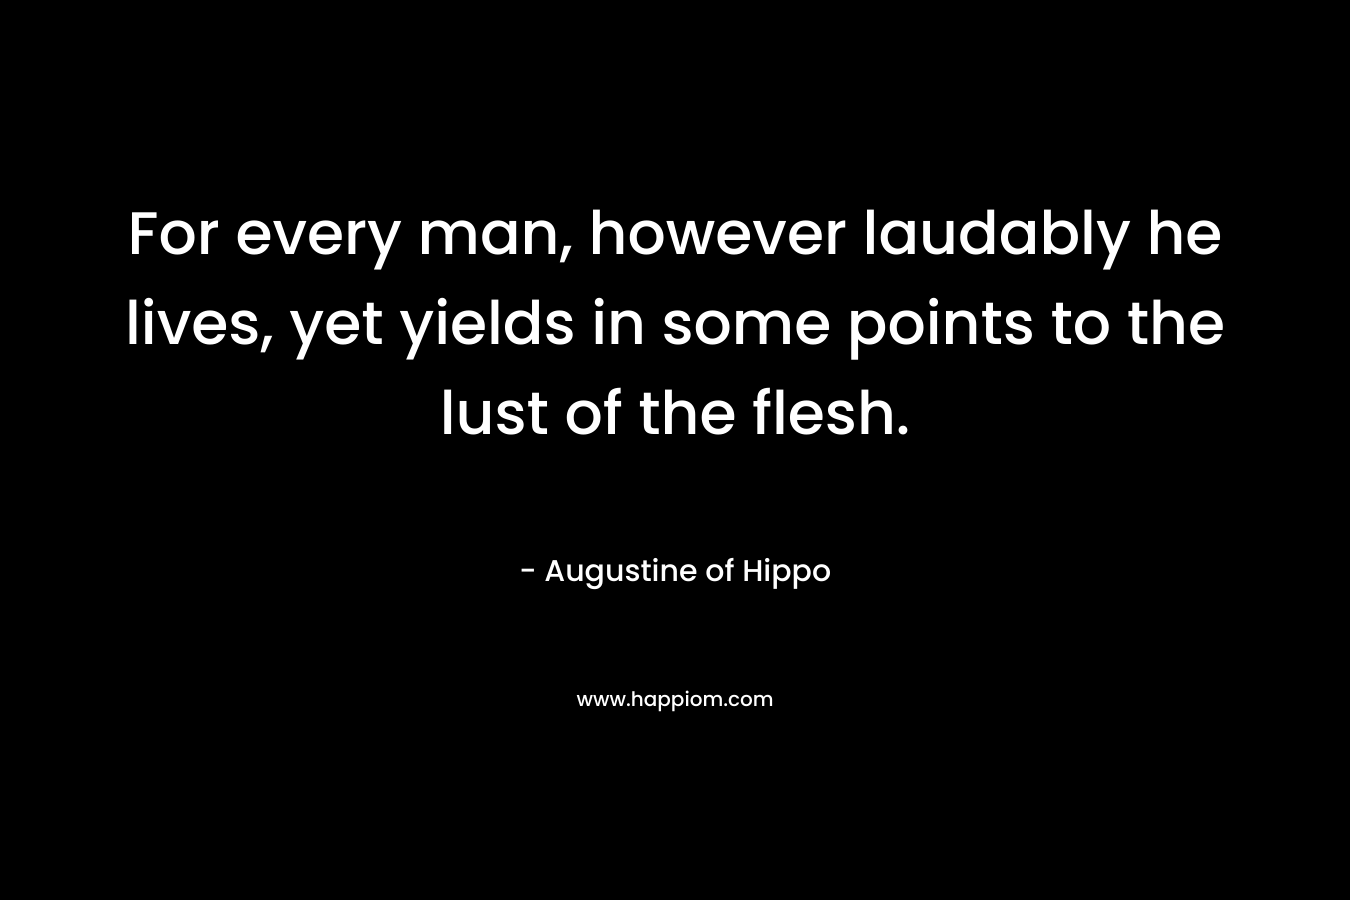 For every man, however laudably he lives, yet yields in some points to the lust of the flesh.